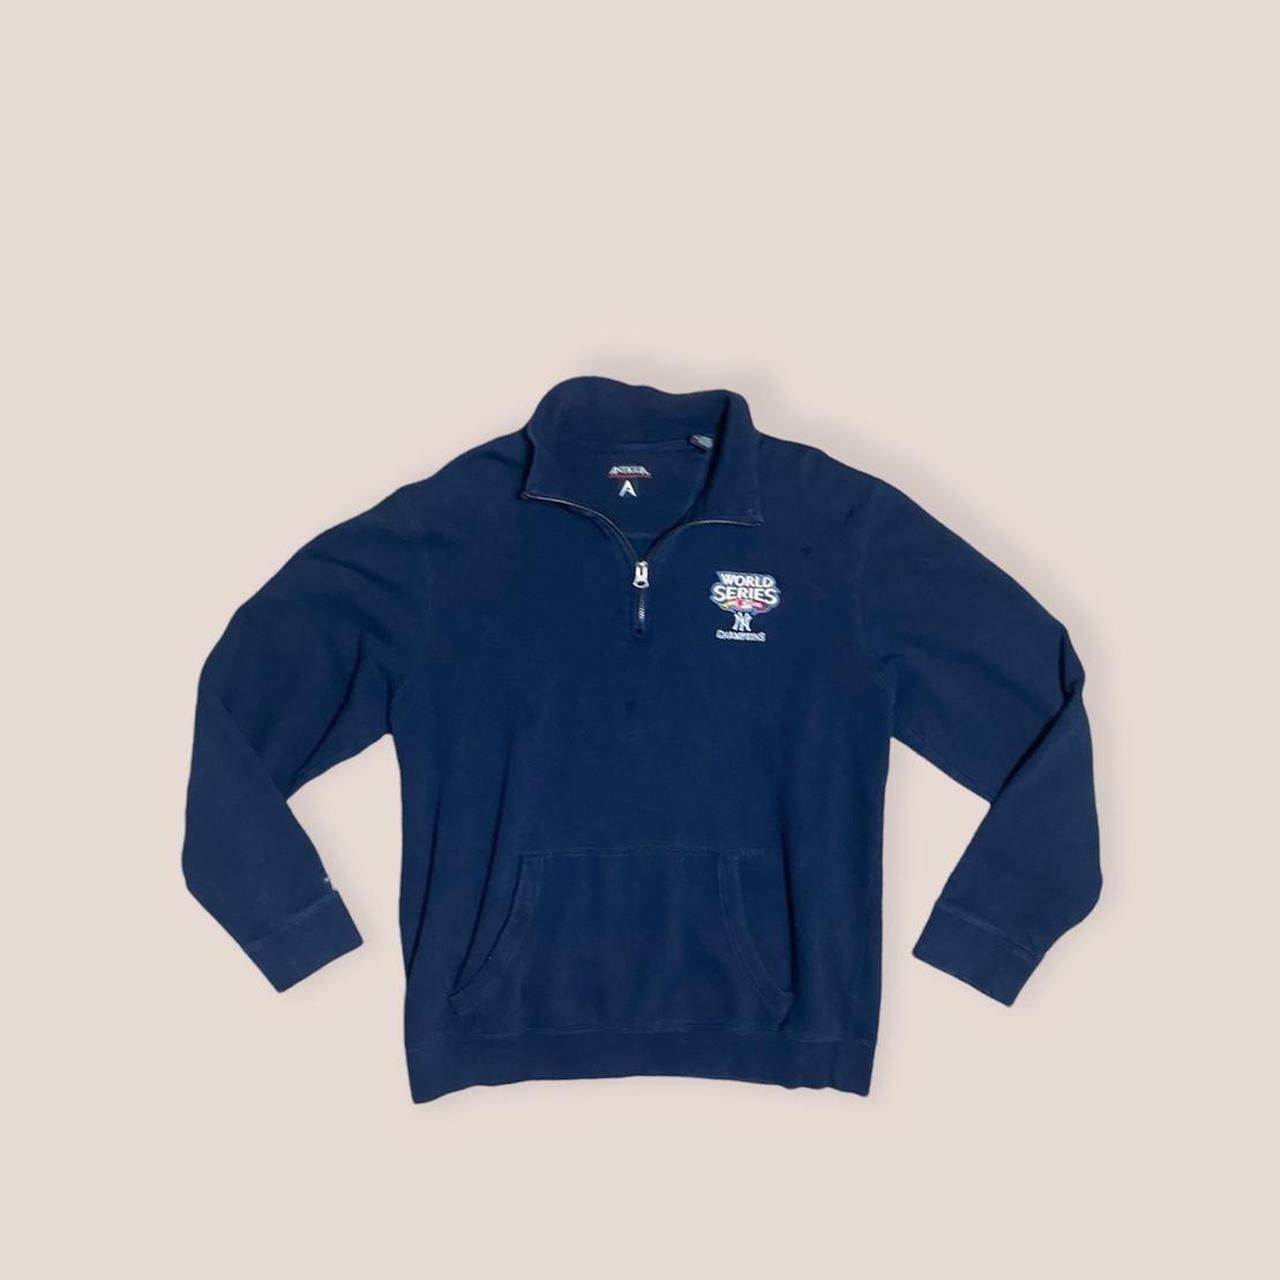 Product Image 1 - Vintage New York Yankees sweater